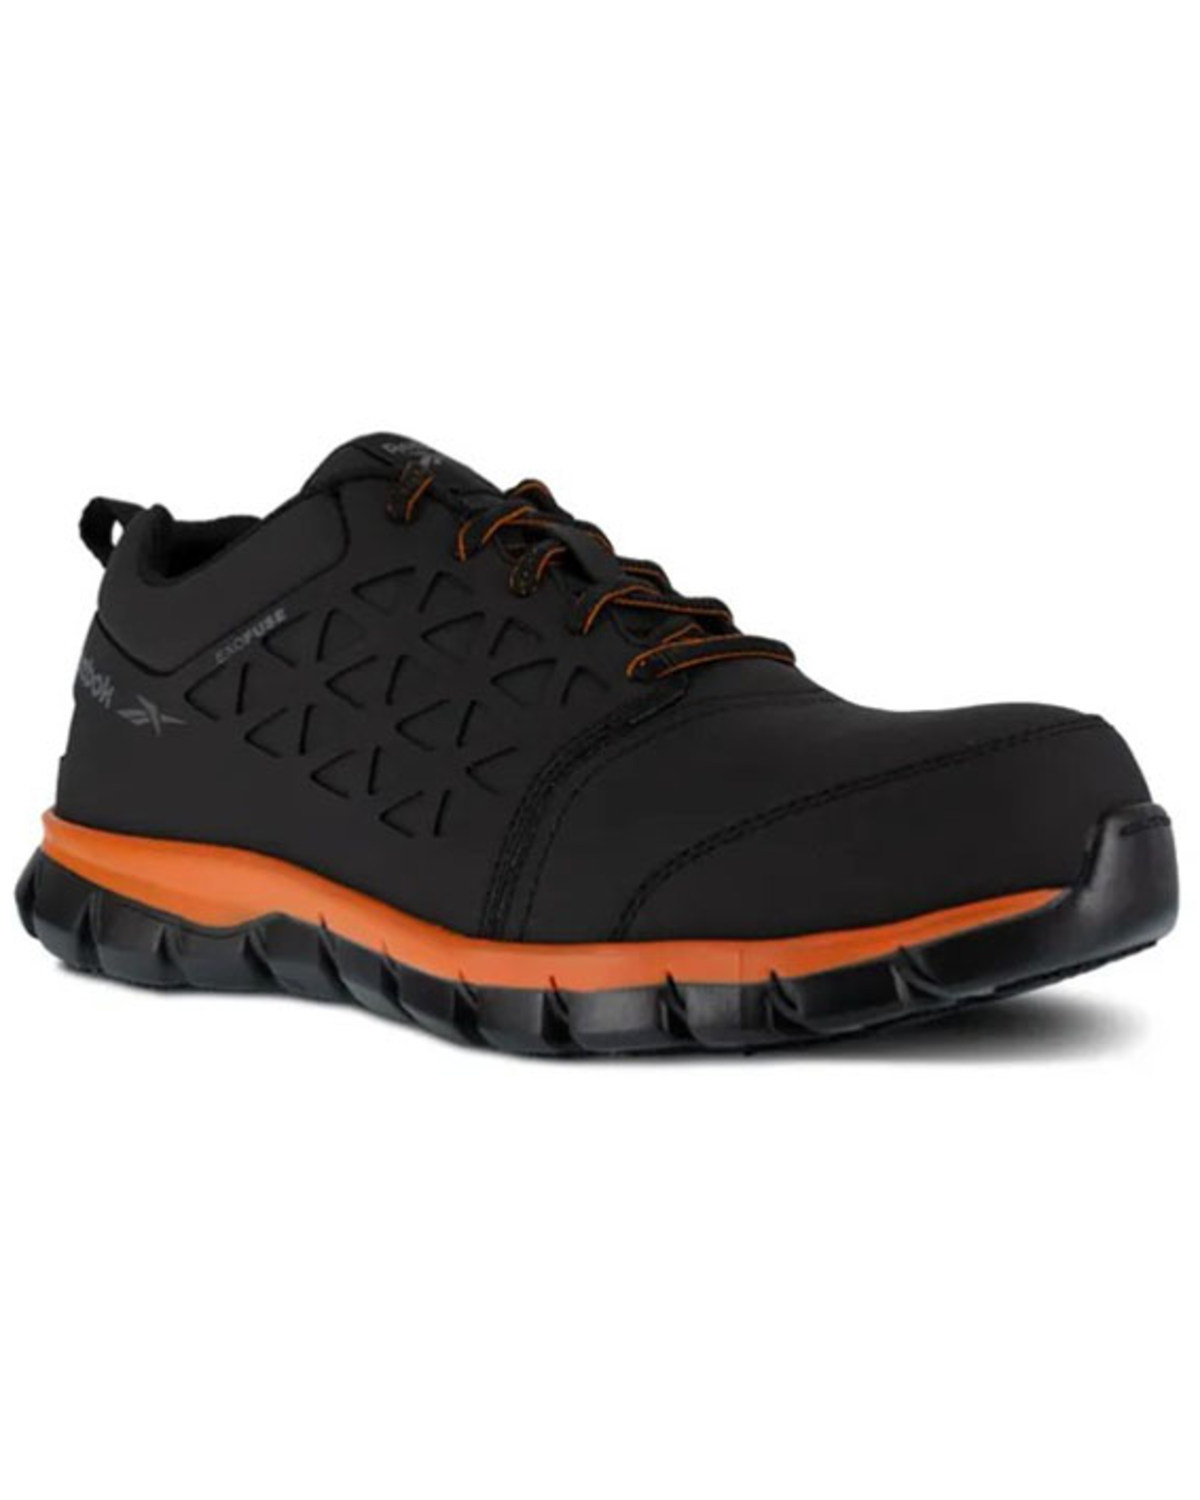 Reebok Men's Sublite Cushioned Work Shoes